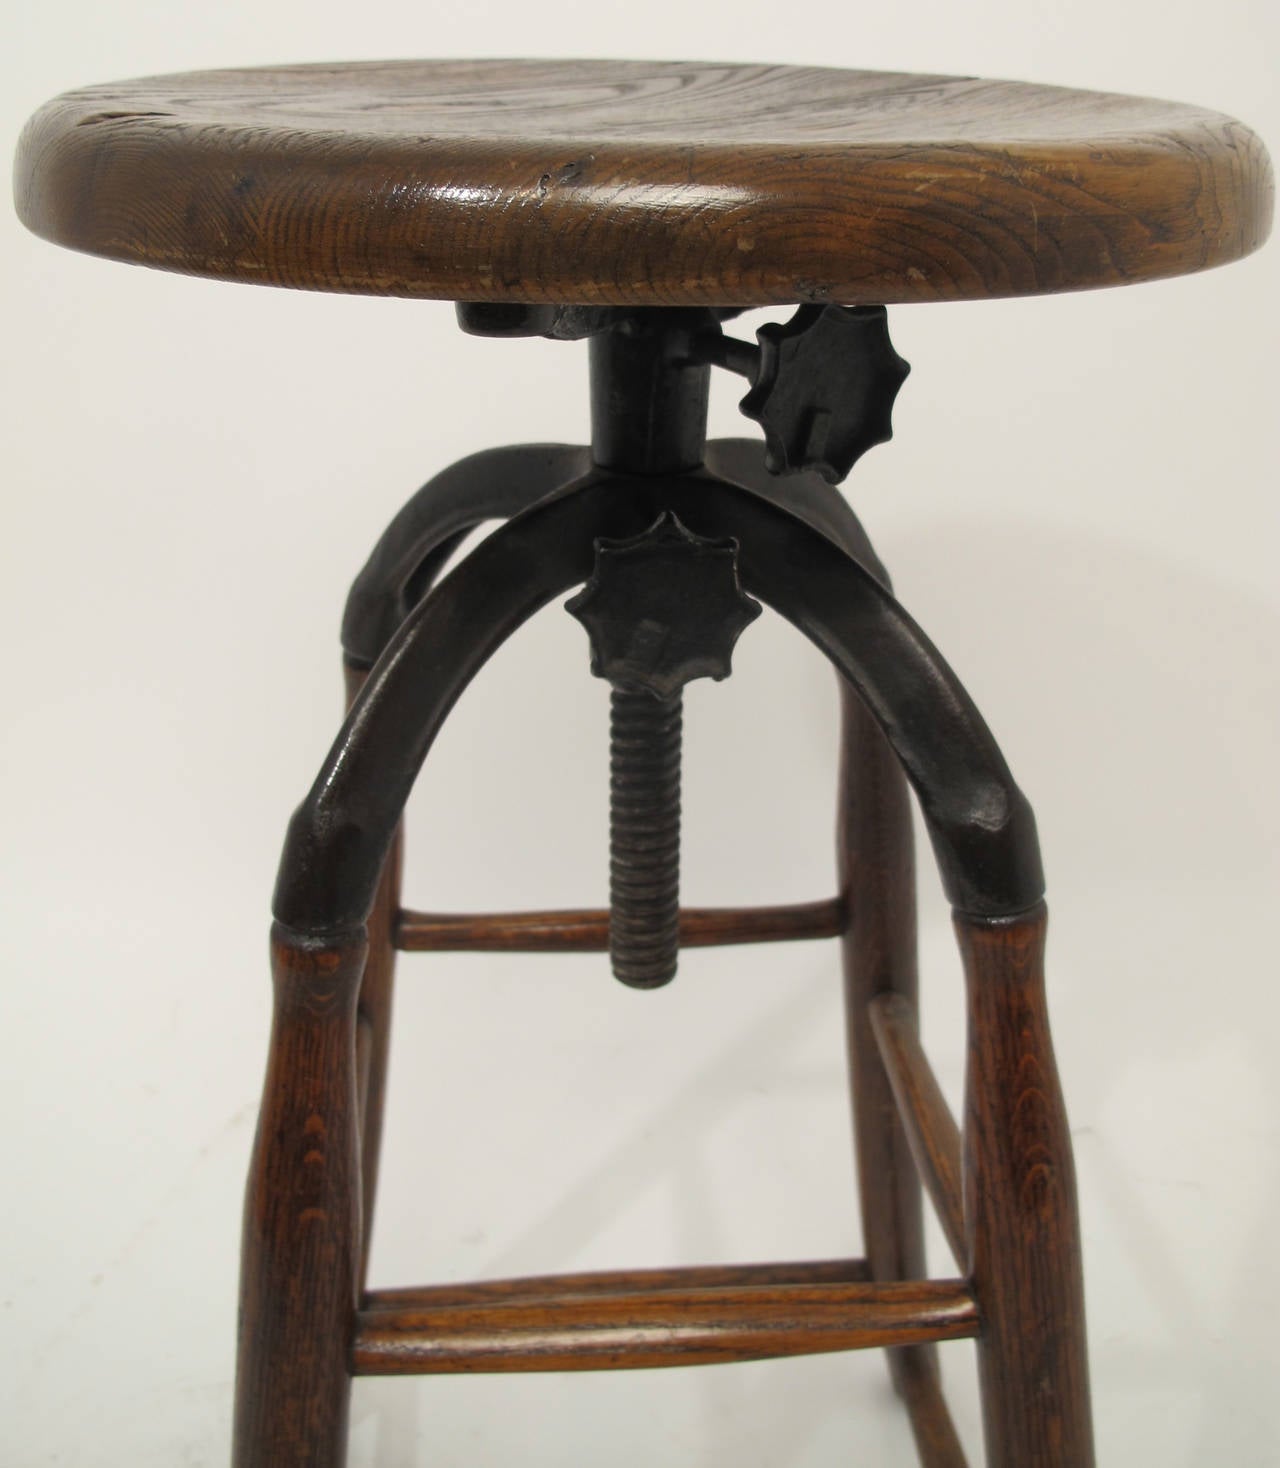 American Oak and Iron Industrial Stool with Solid Oak Seat